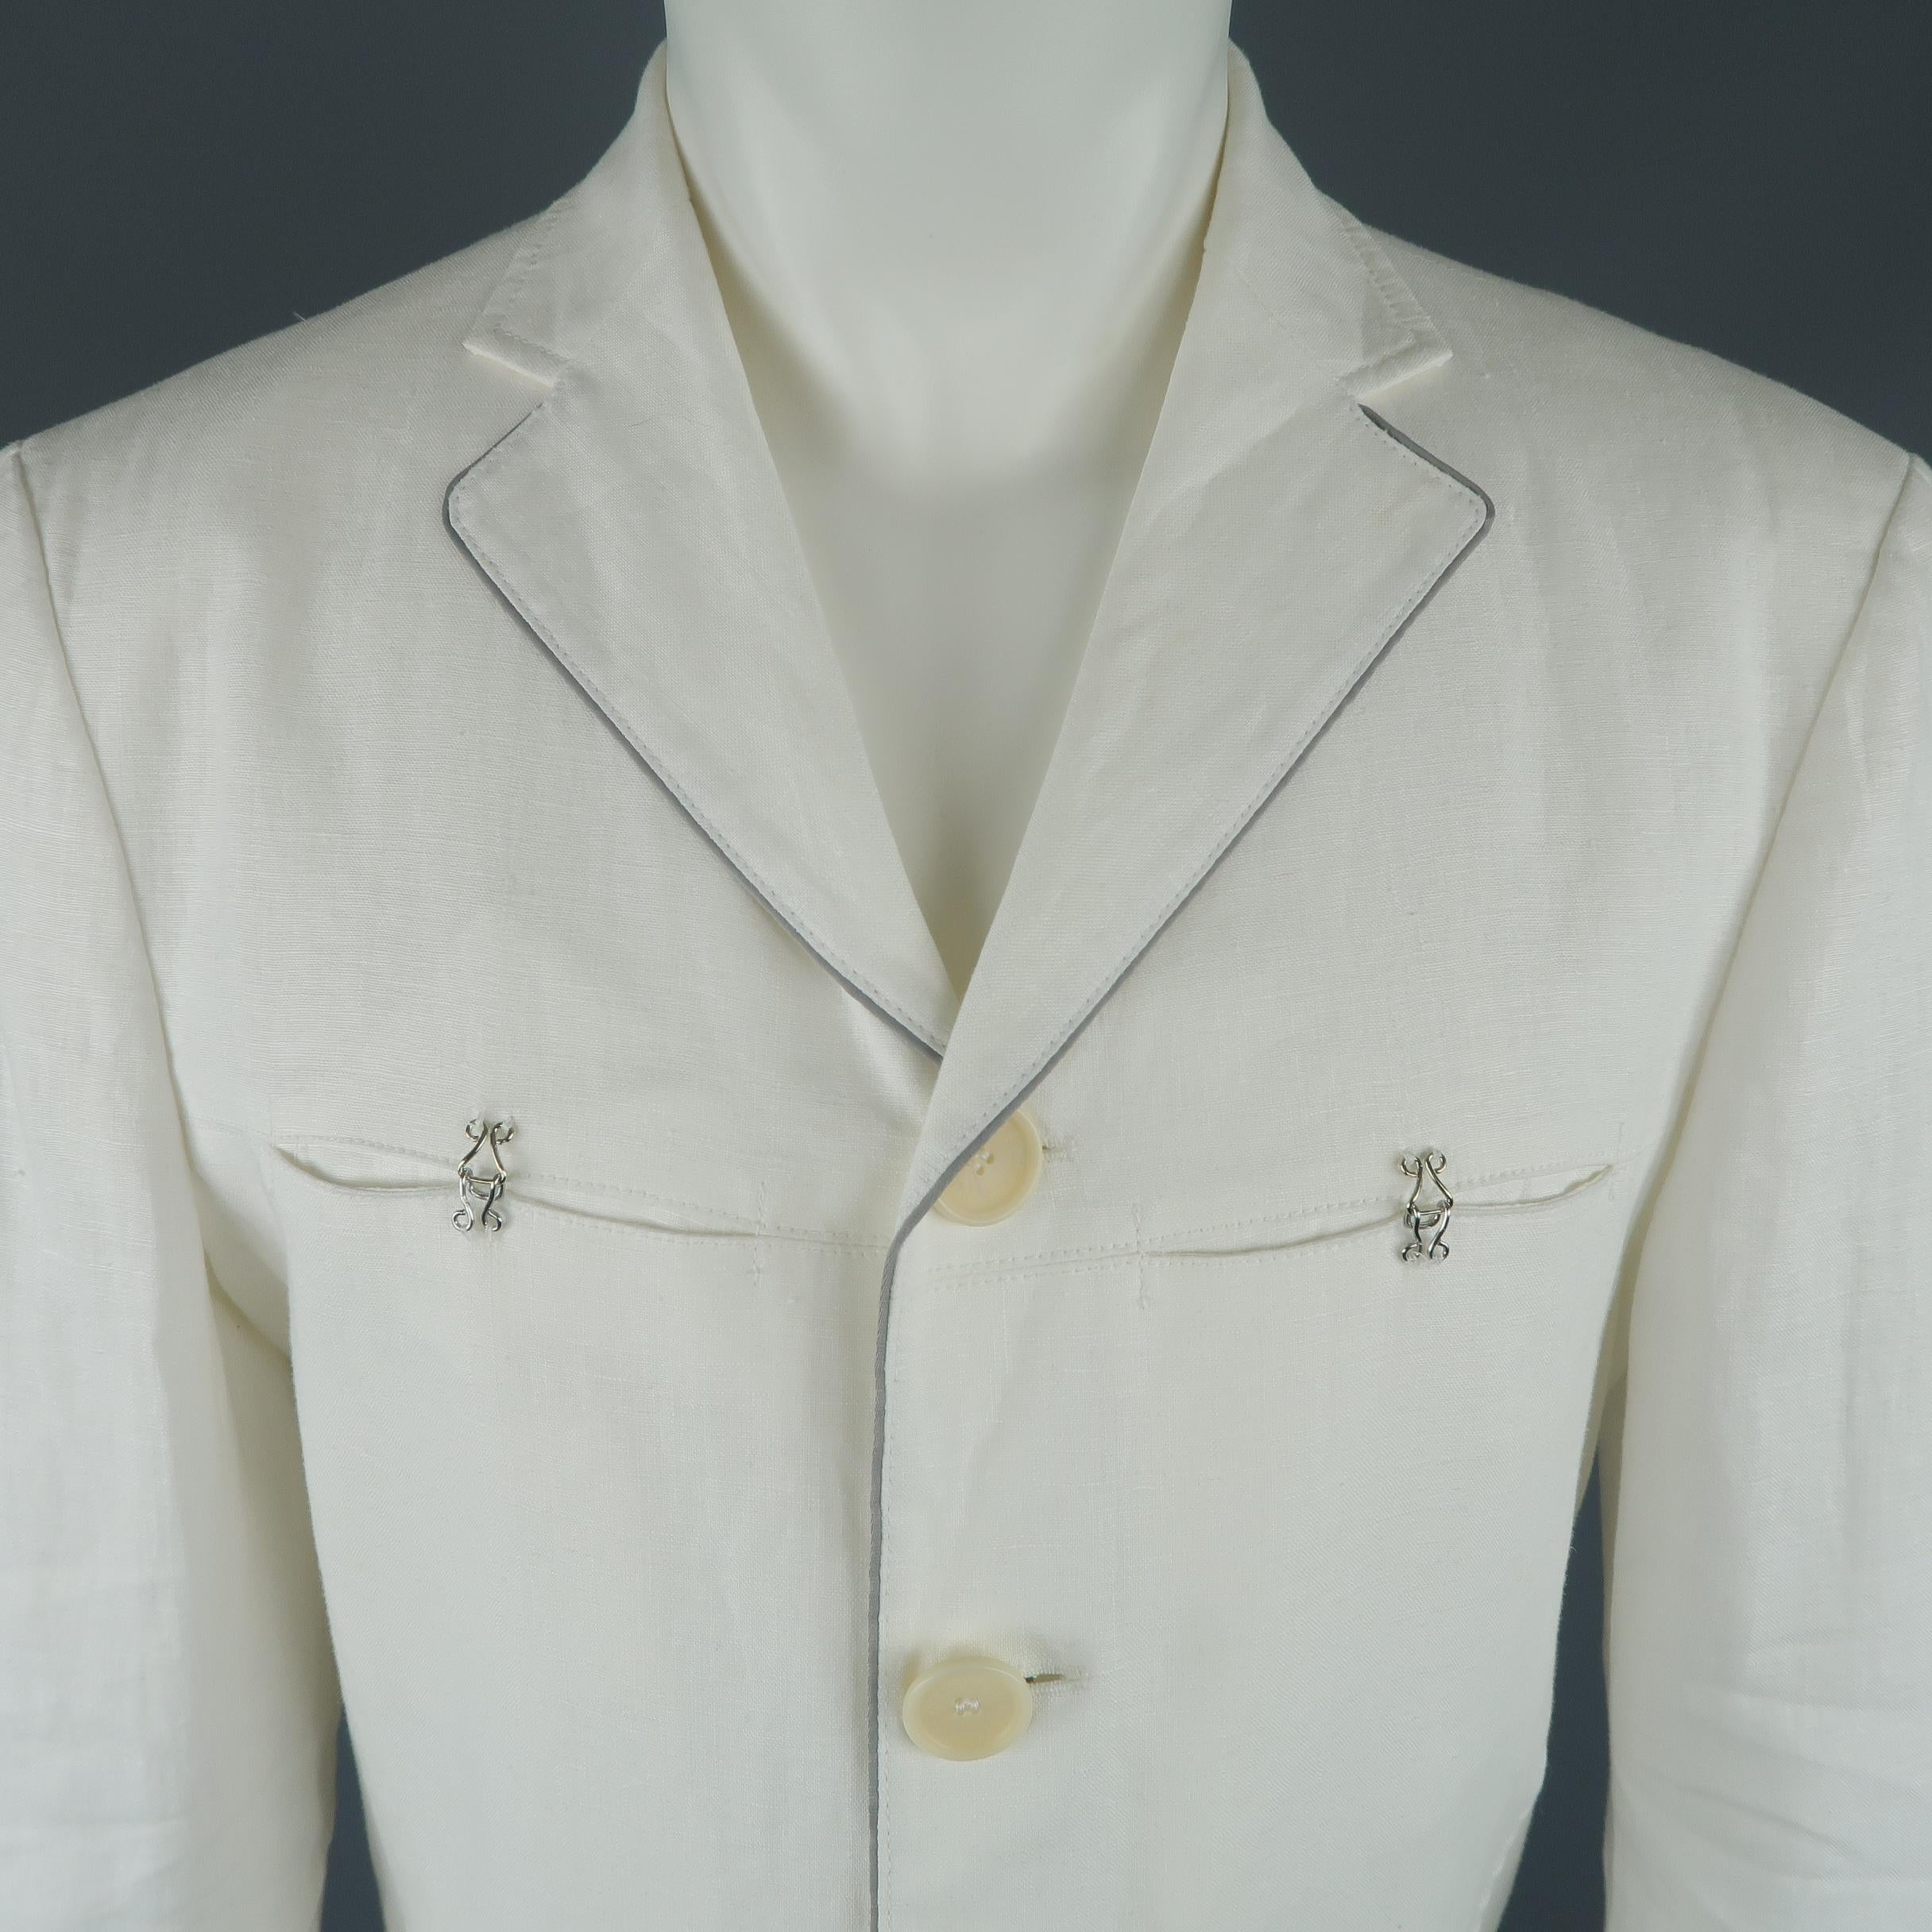 Vintage JEAN'S PAUL GAULTIER sport coat comes in white linen with a notch lapel, four button front, hook eye chest pockets, pleated patch flap pockets, and gray piping. Minor wear. Made in Italy.
 
Good Pre-Owned Condition.
Marked: IT 50
